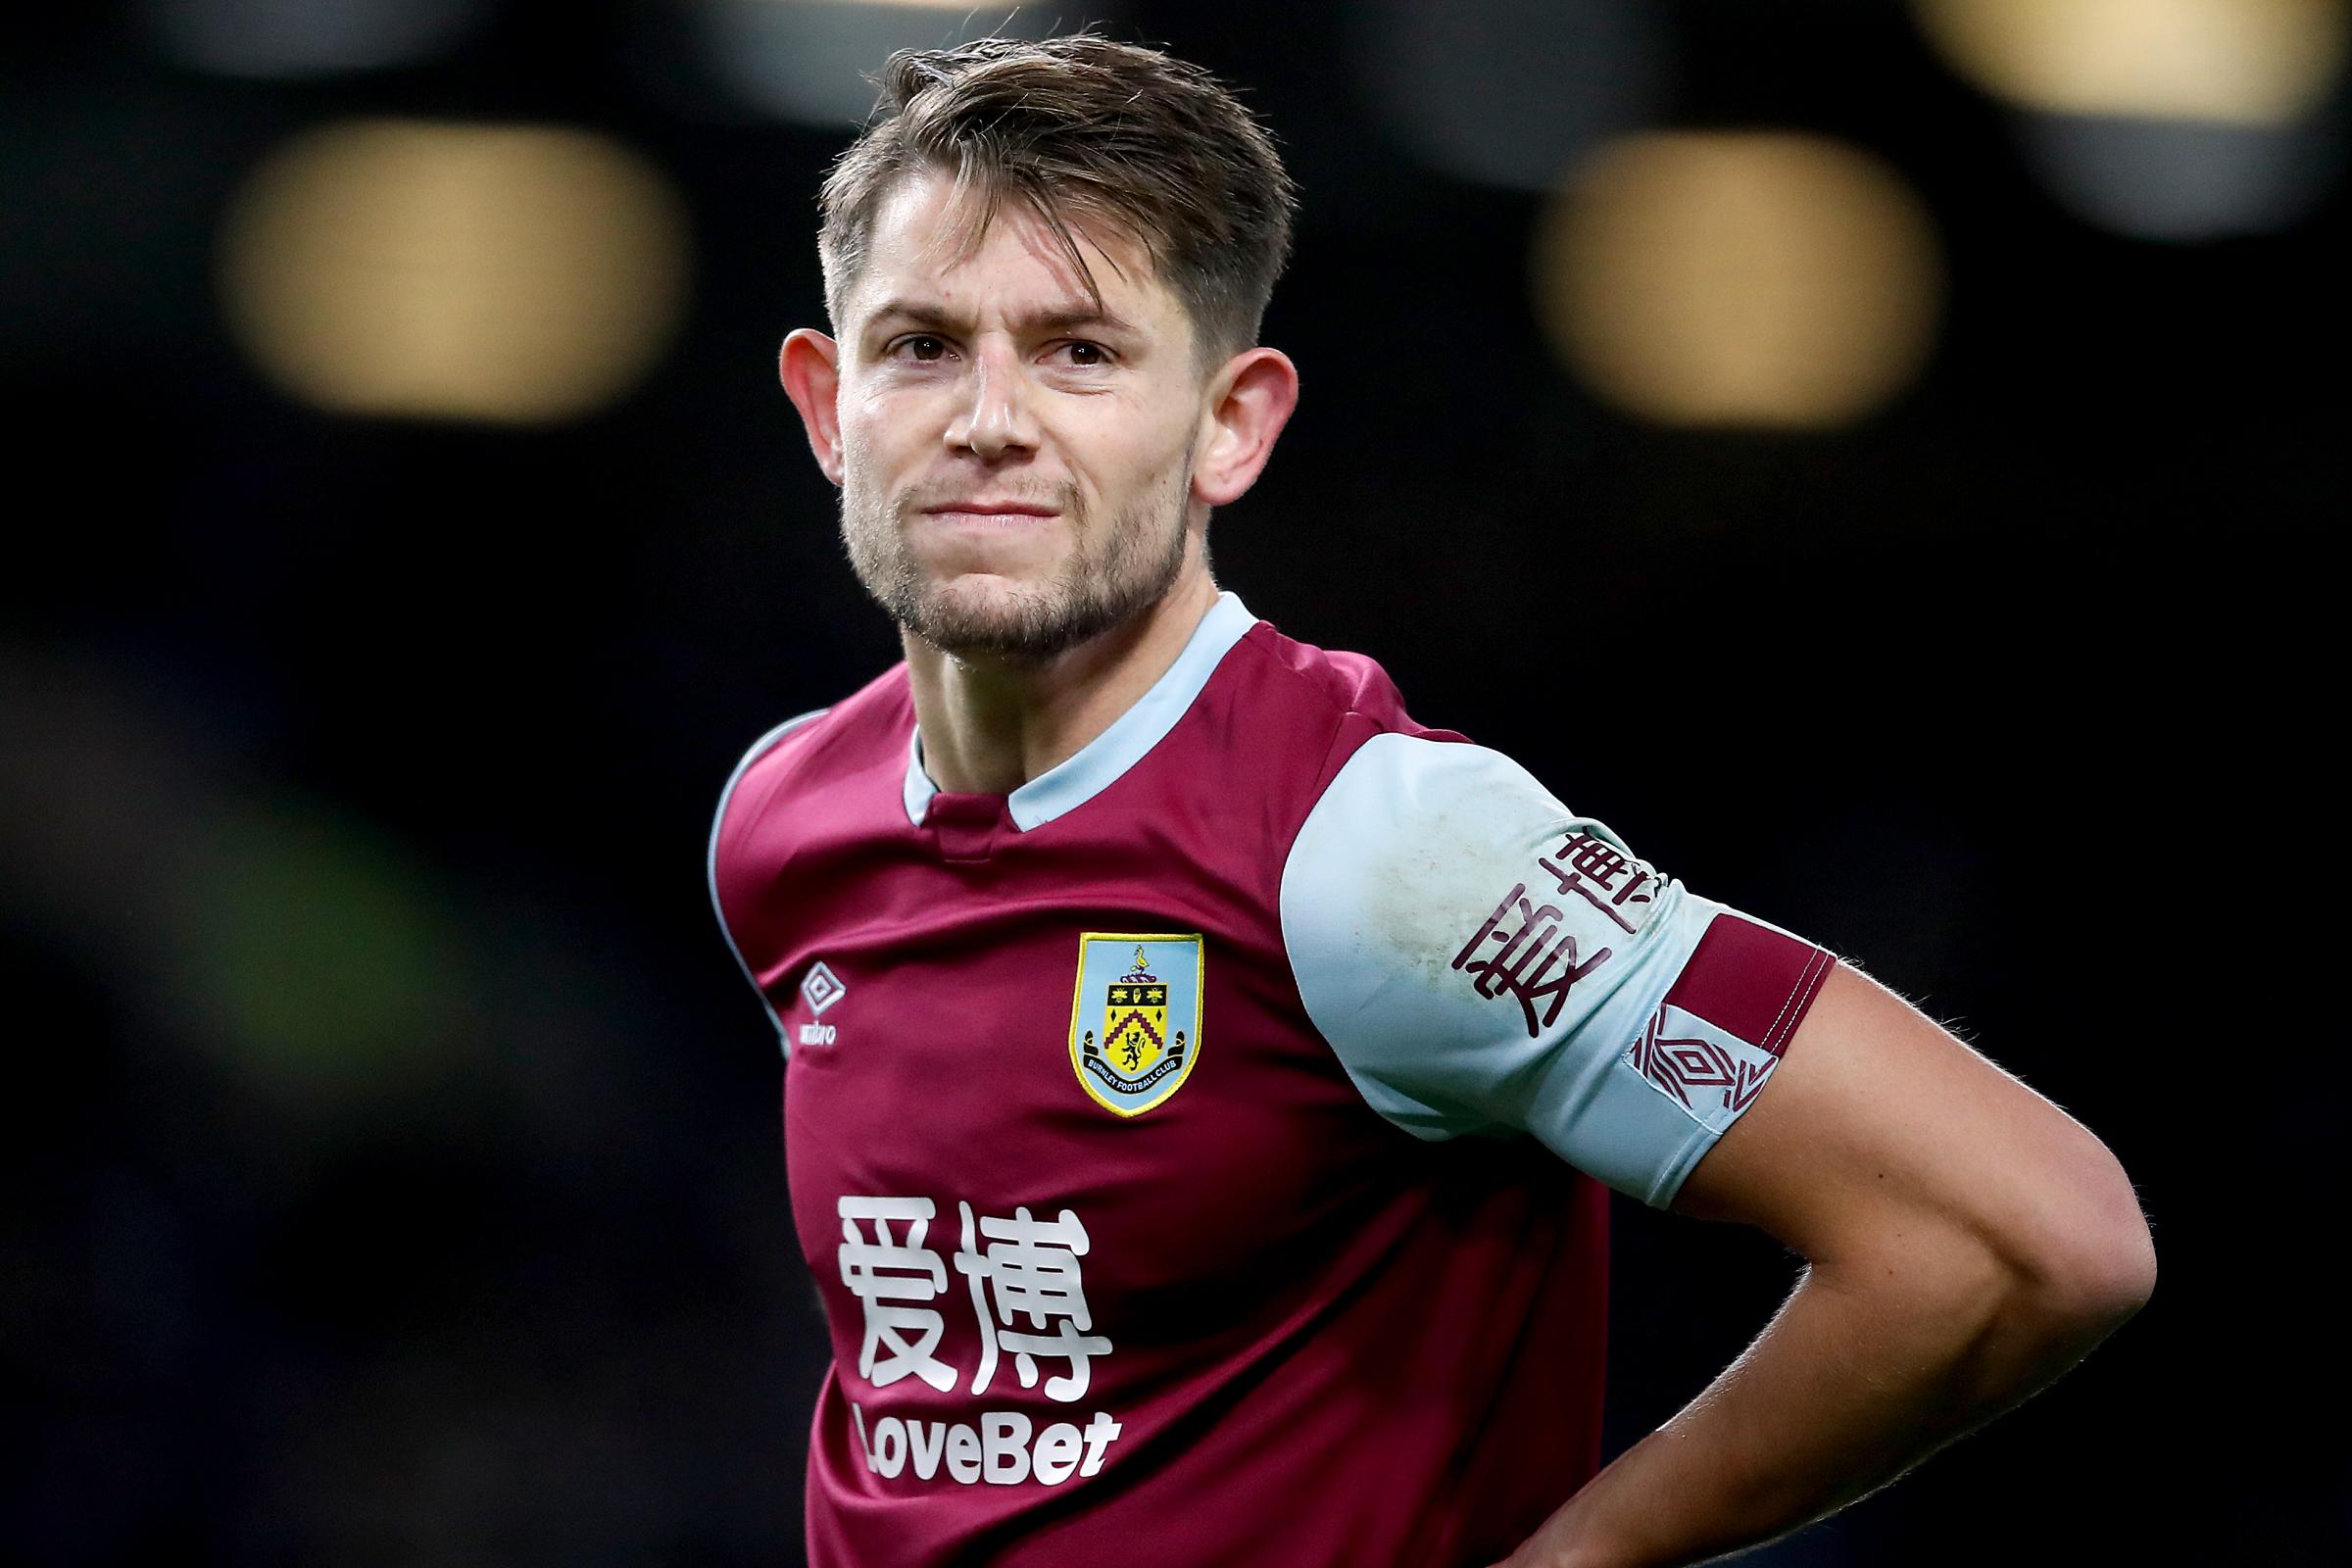 Burnley’s James Tarkowski opens up on England omission and transfer interest